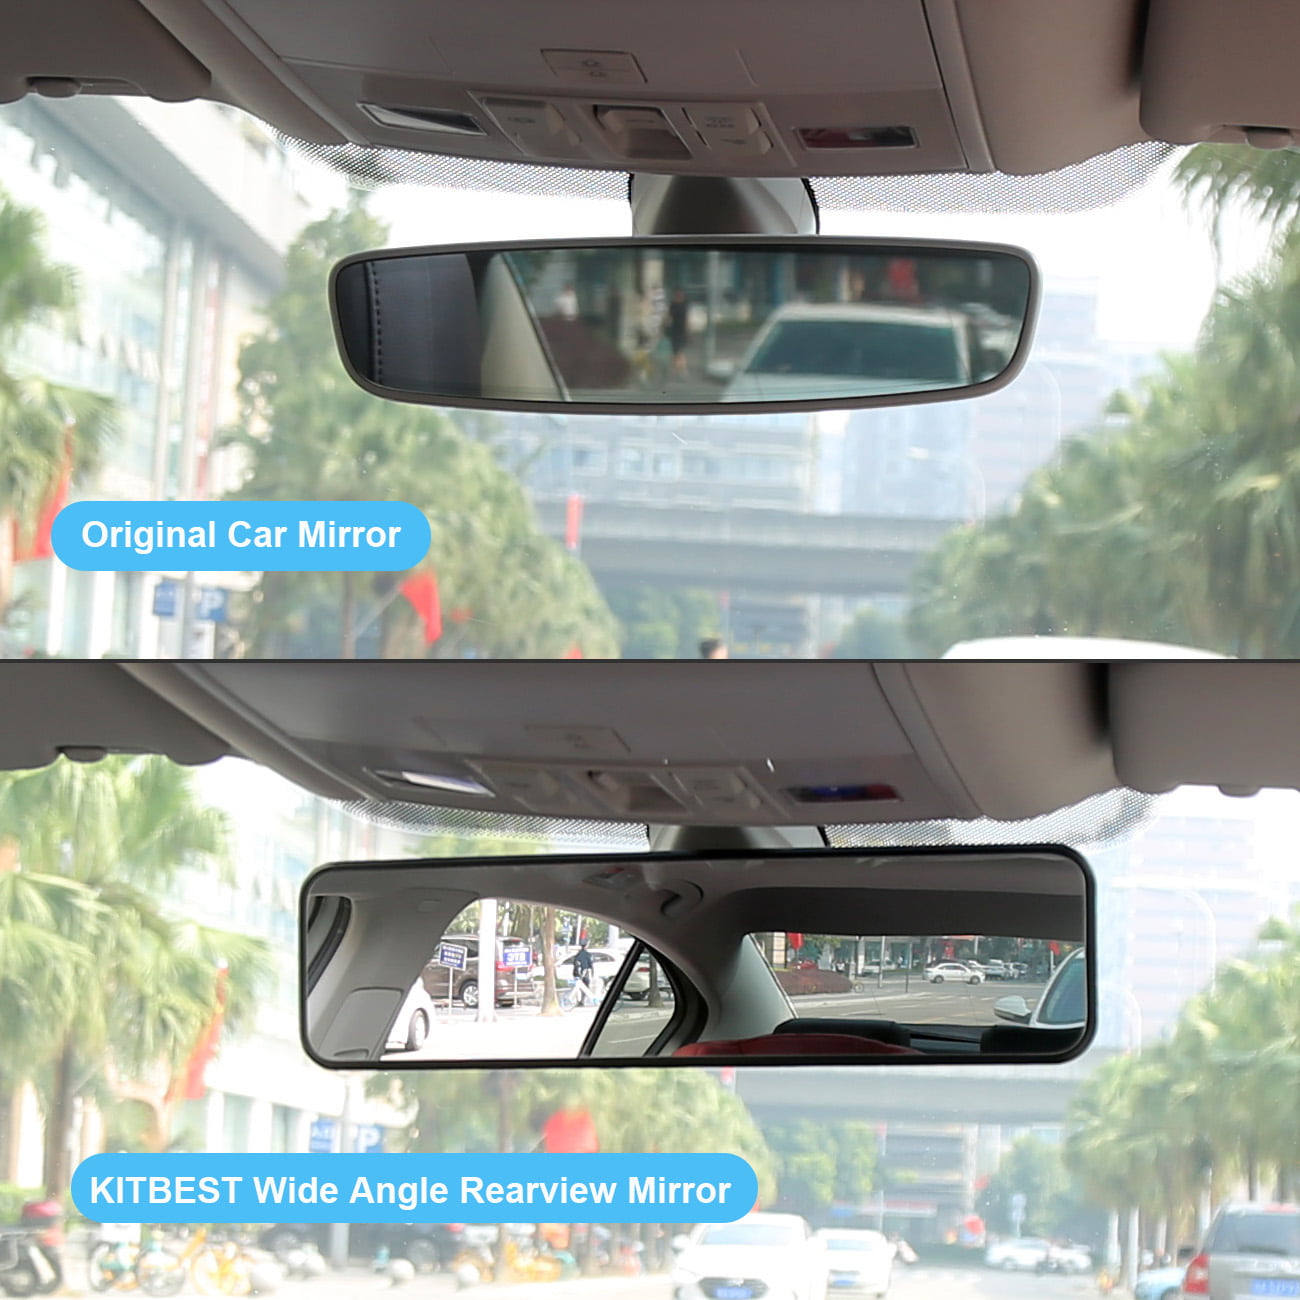 Convex Rearview Mirror Interior Clip on Wide Angle Rear View Mirror to Reduce Blind Spot Effectively Kitbest Rear View Mirror 